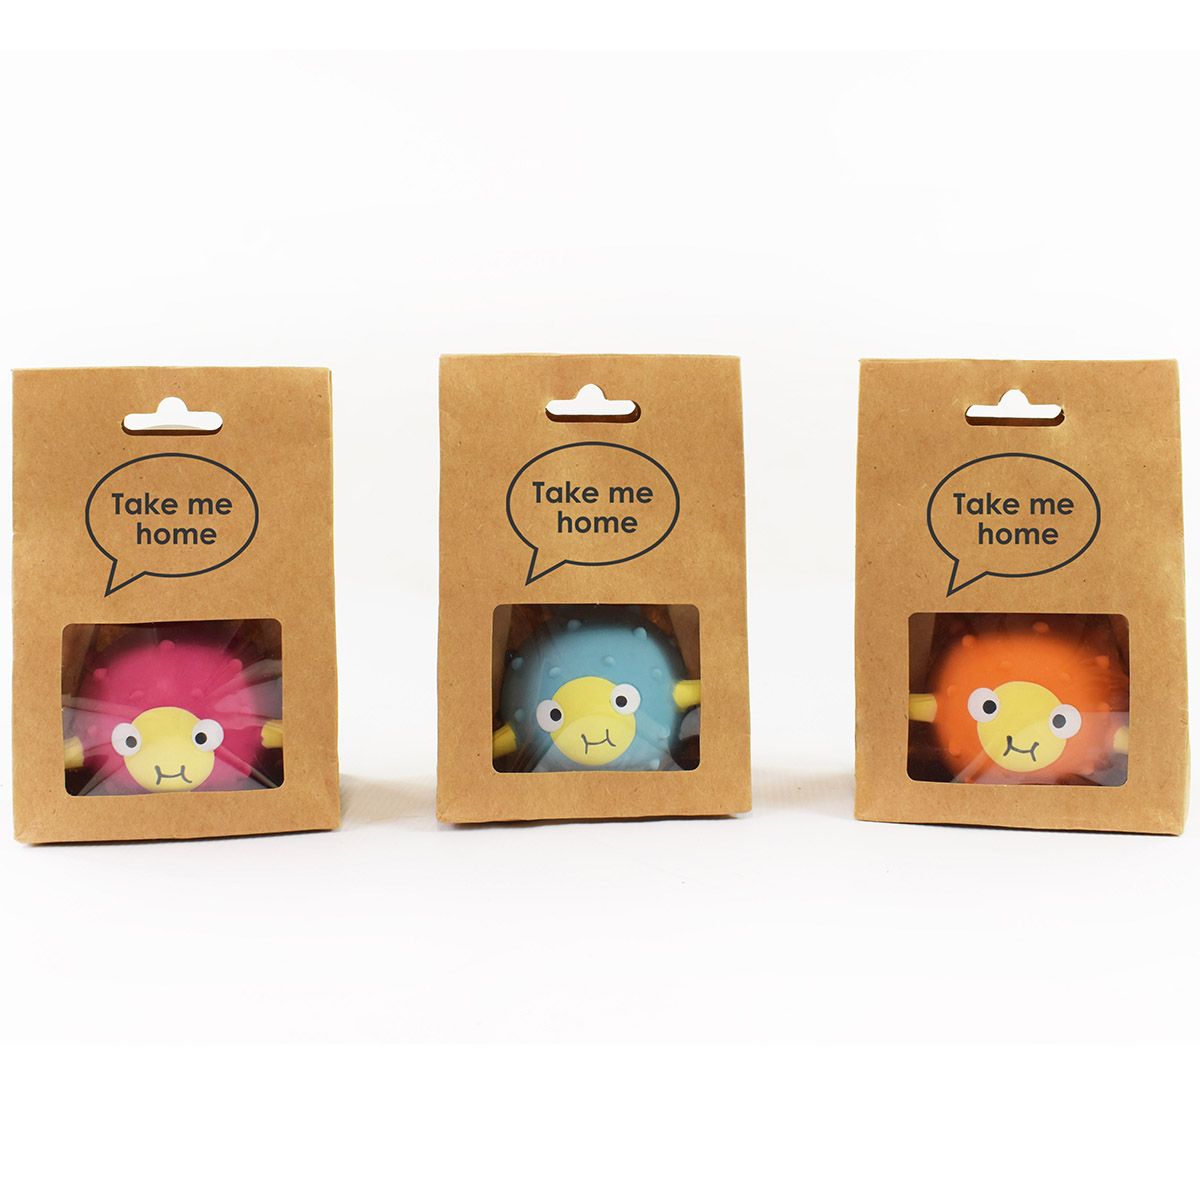 Display of the 3 colours available for the pufferfish toys inside packaging.